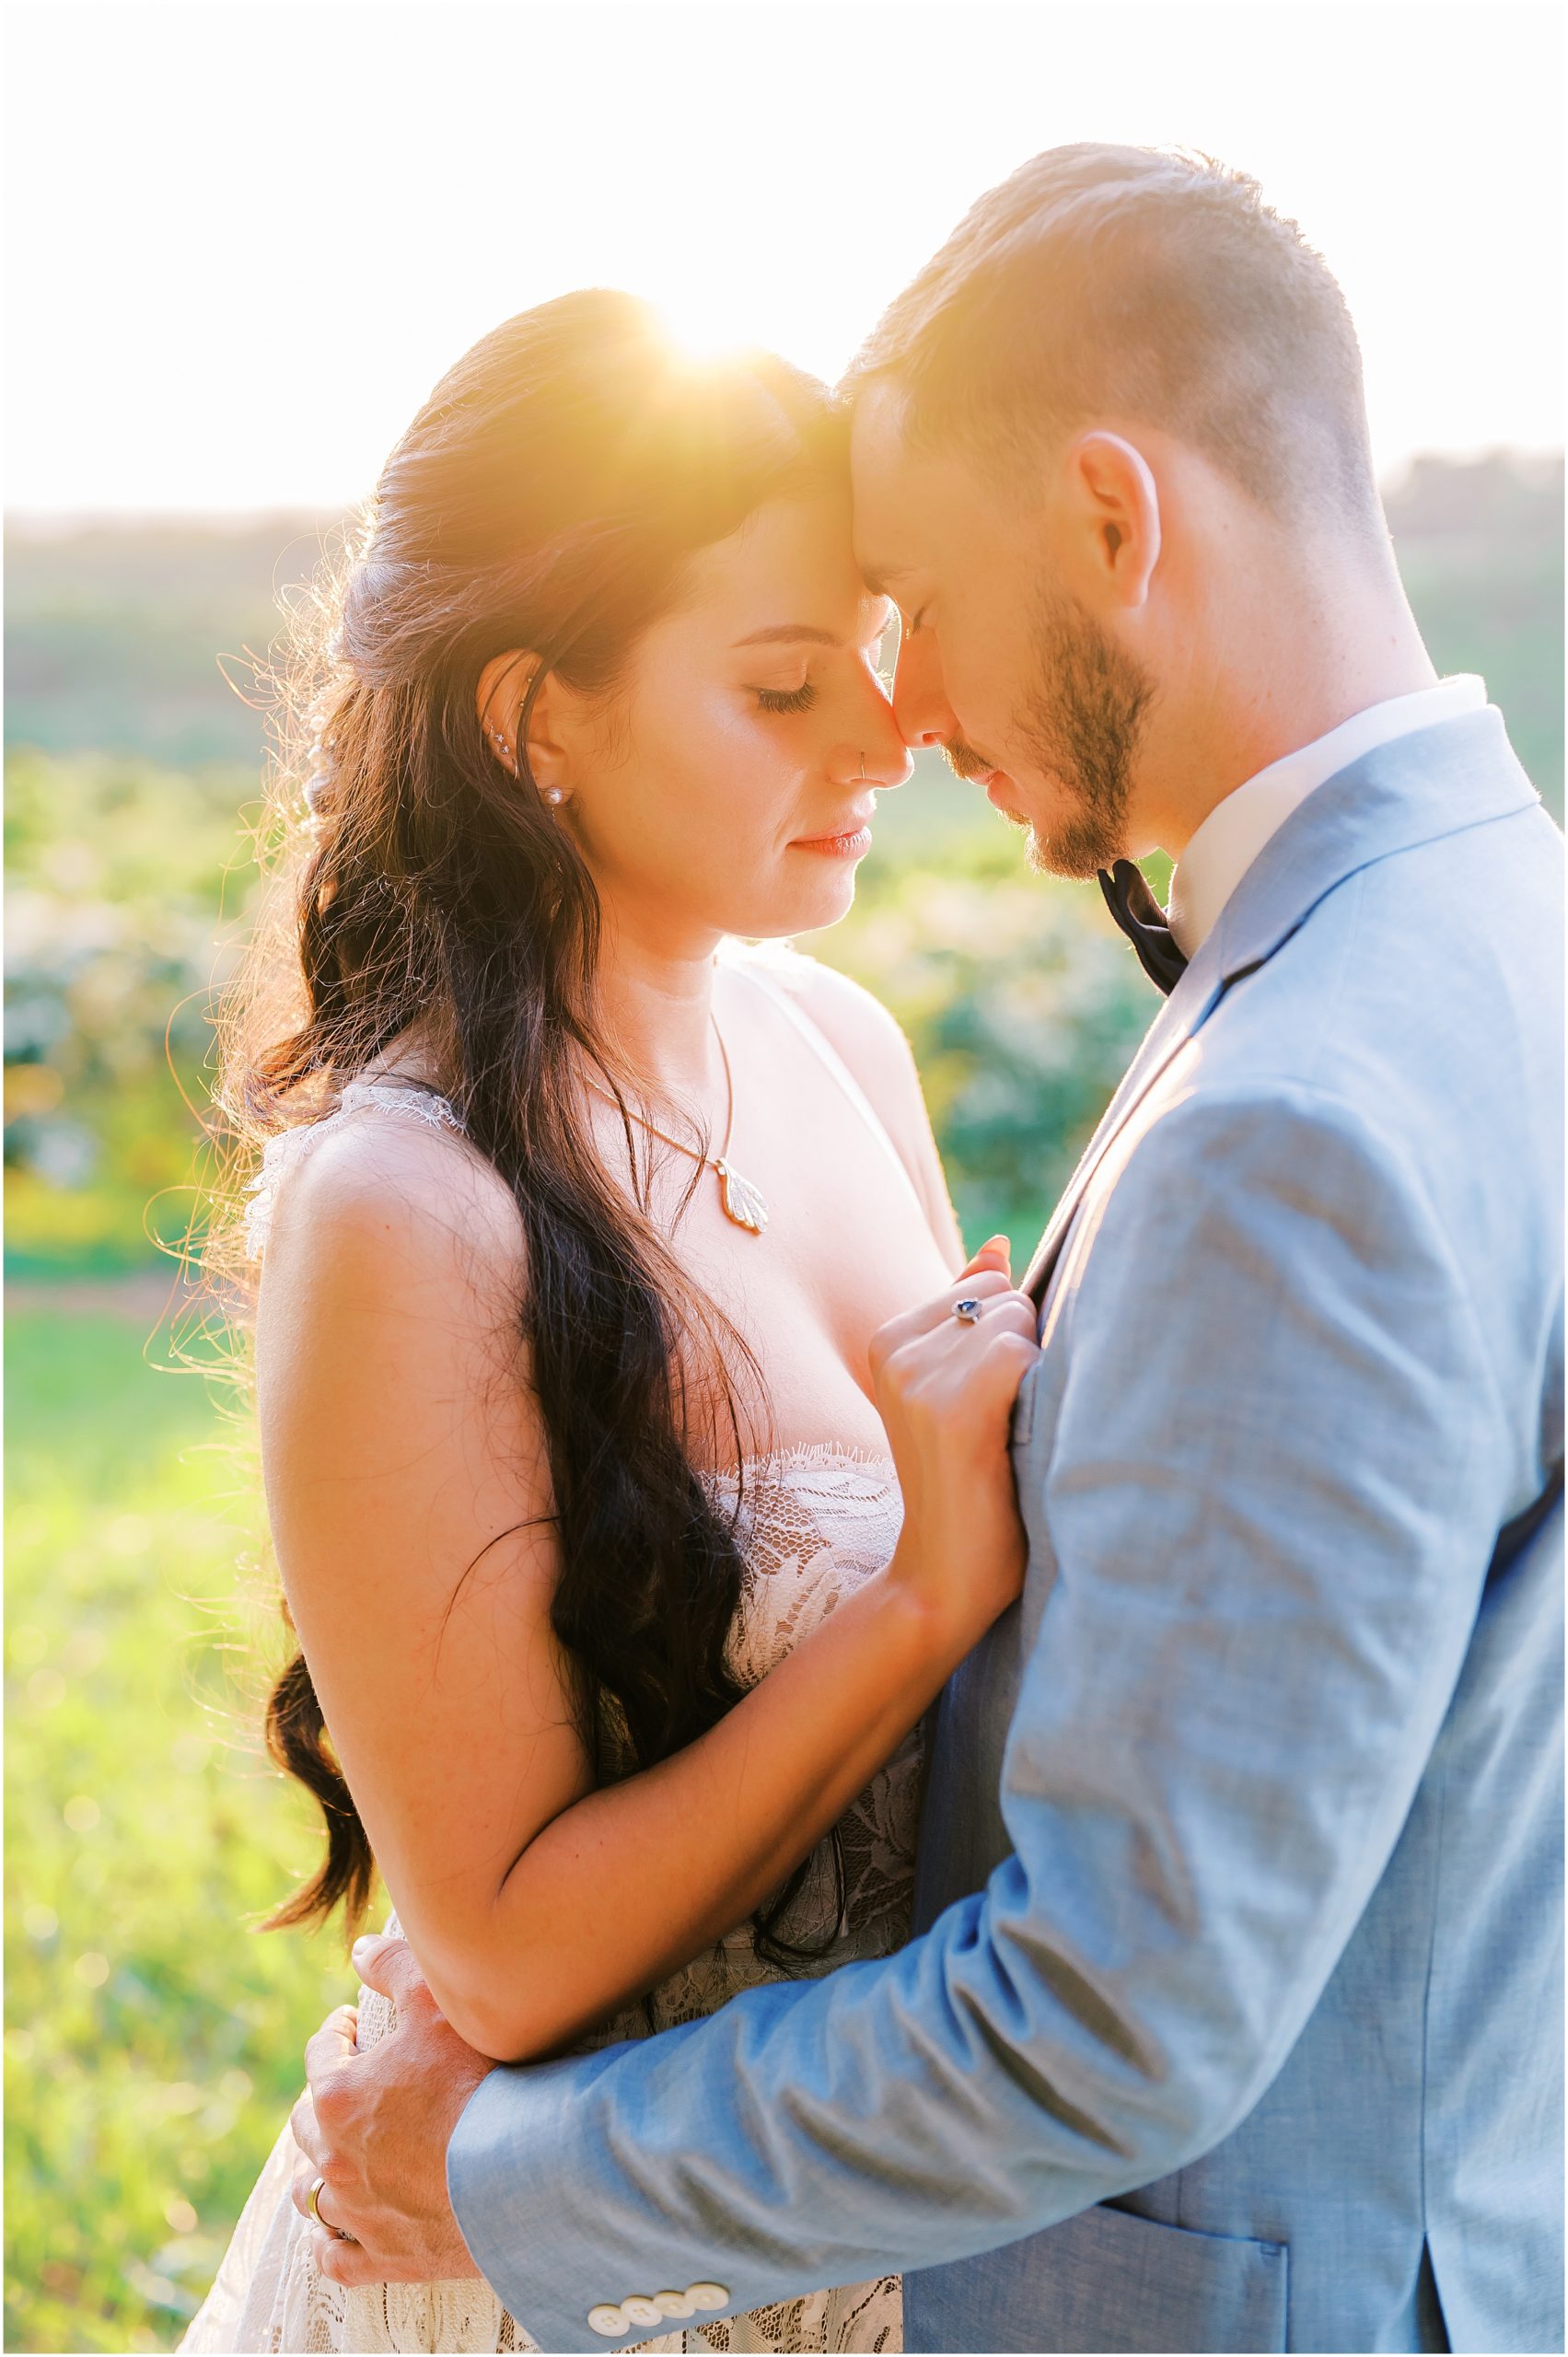 Newlywed portrait during golden hour